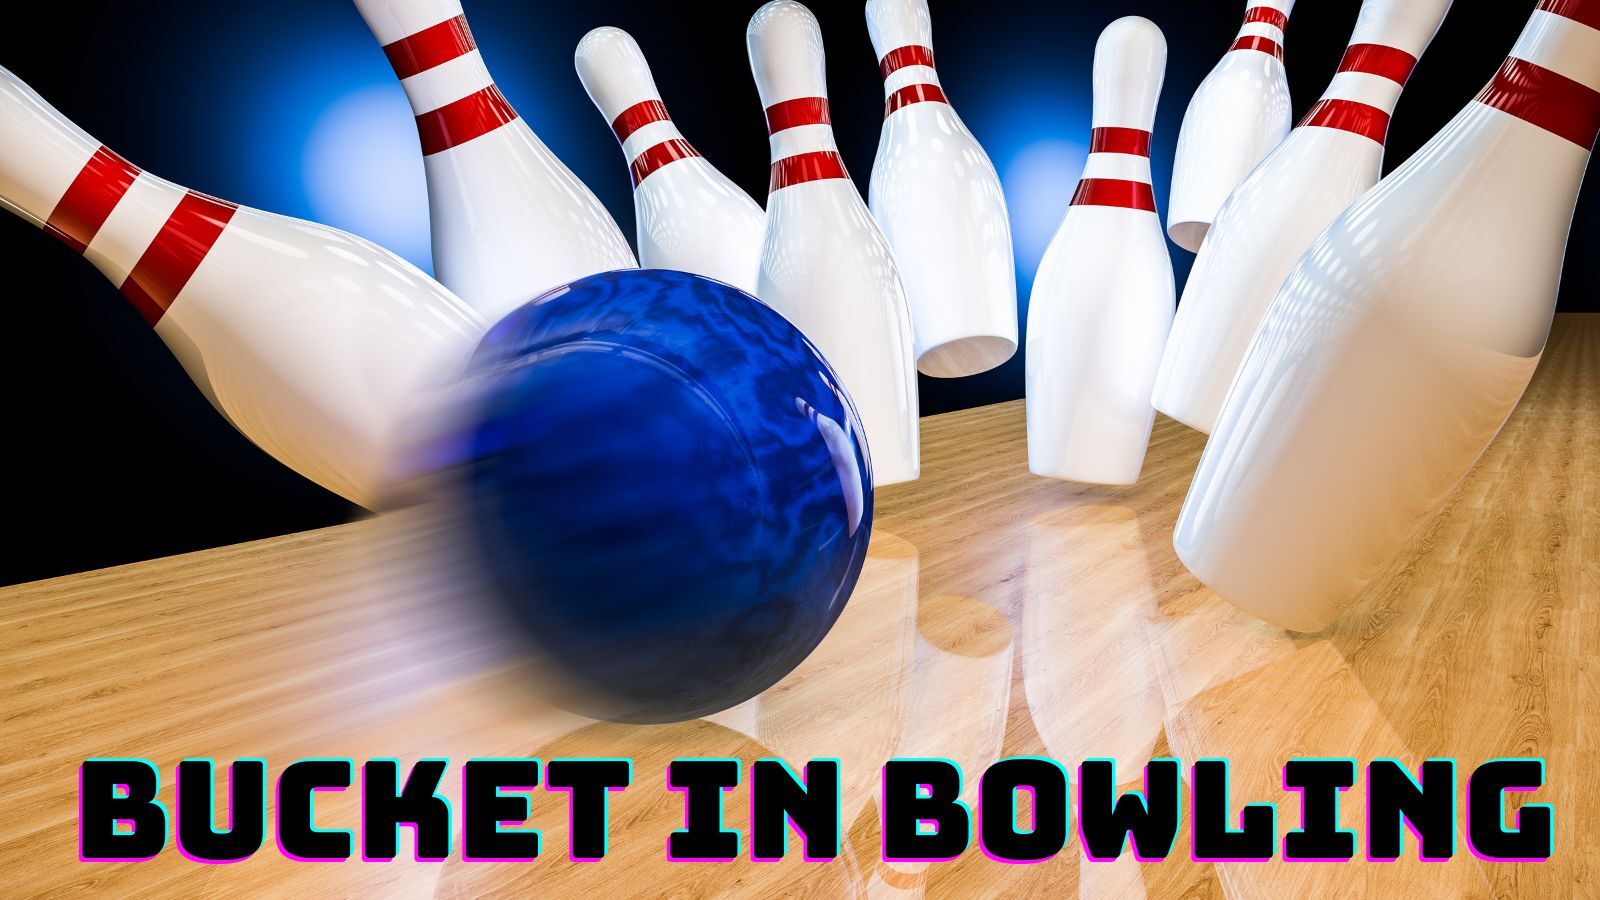 What is a bucket in bowling? How to Convert It?